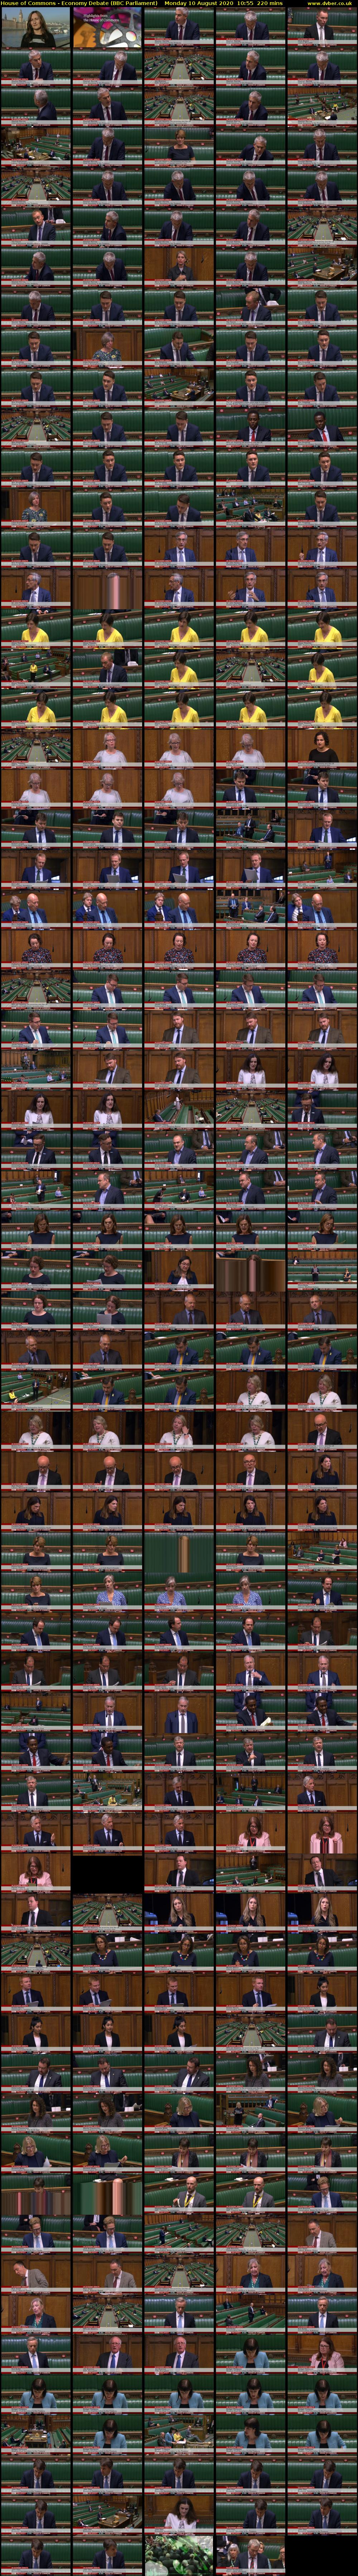 House of Commons - Economy Debate (BBC Parliament) Monday 10 August 2020 10:55 - 14:35